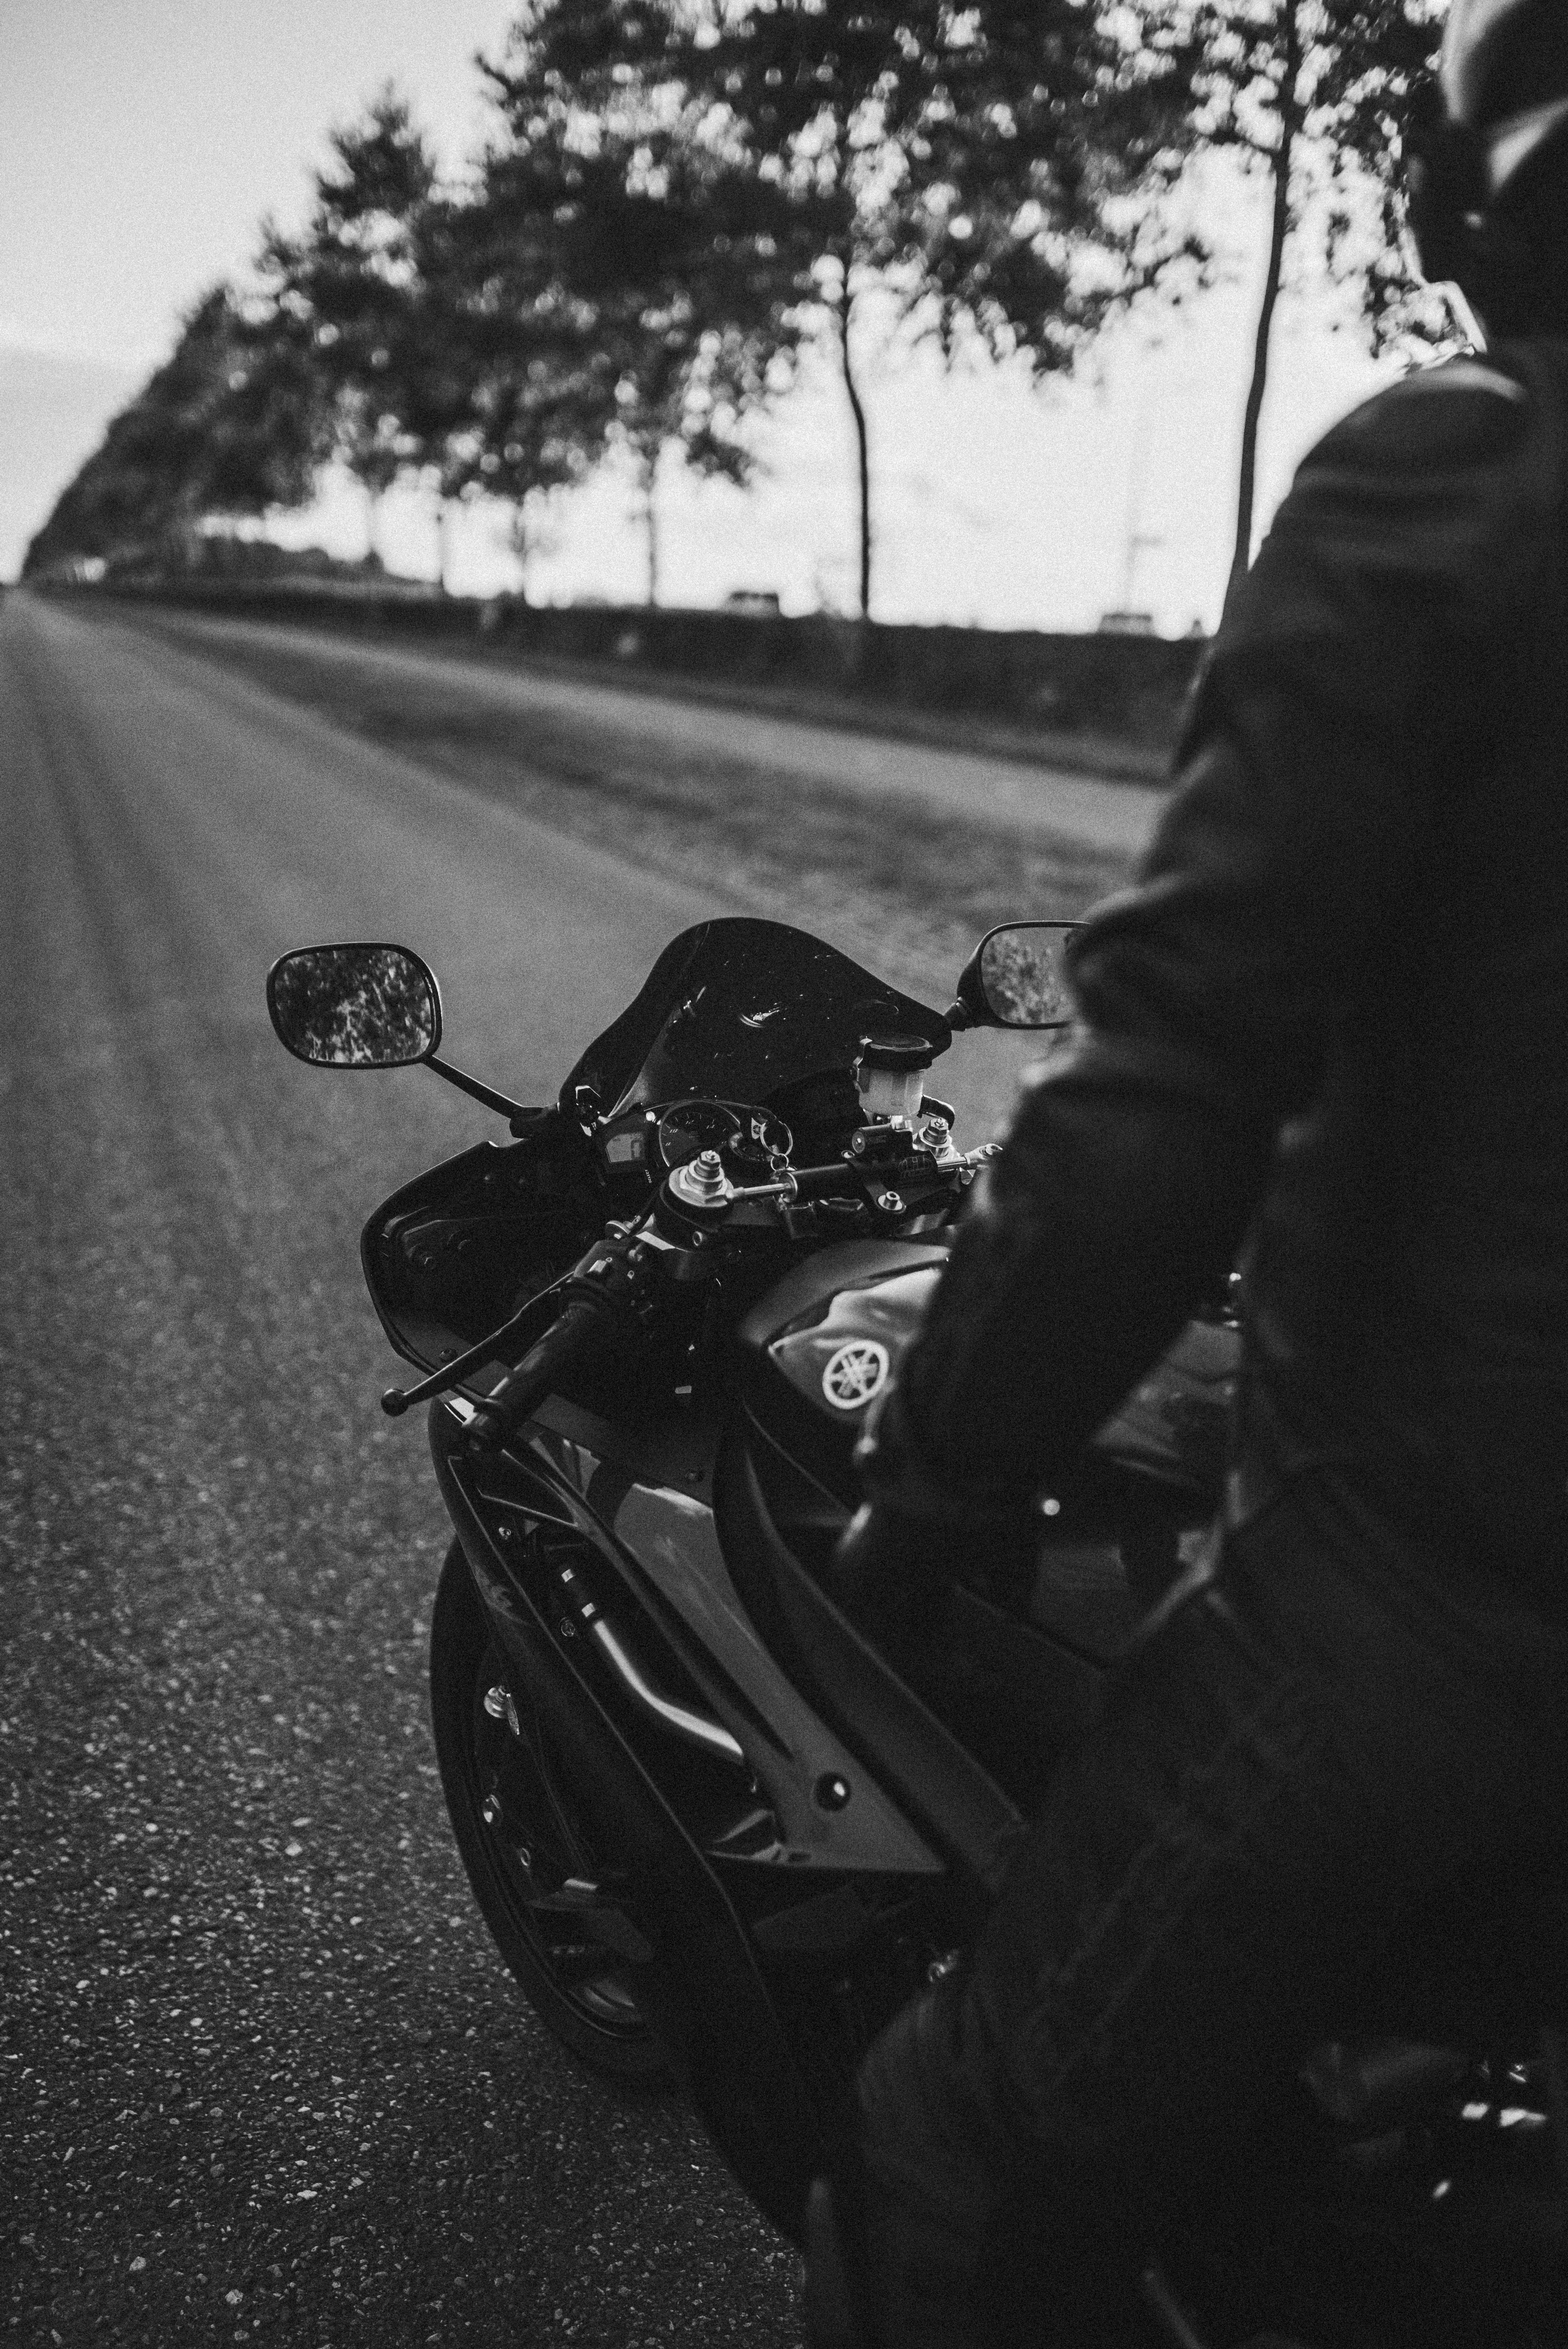 motorcycles, motorcyclist, bike, back view, rear view, bw, chb, motorcycle